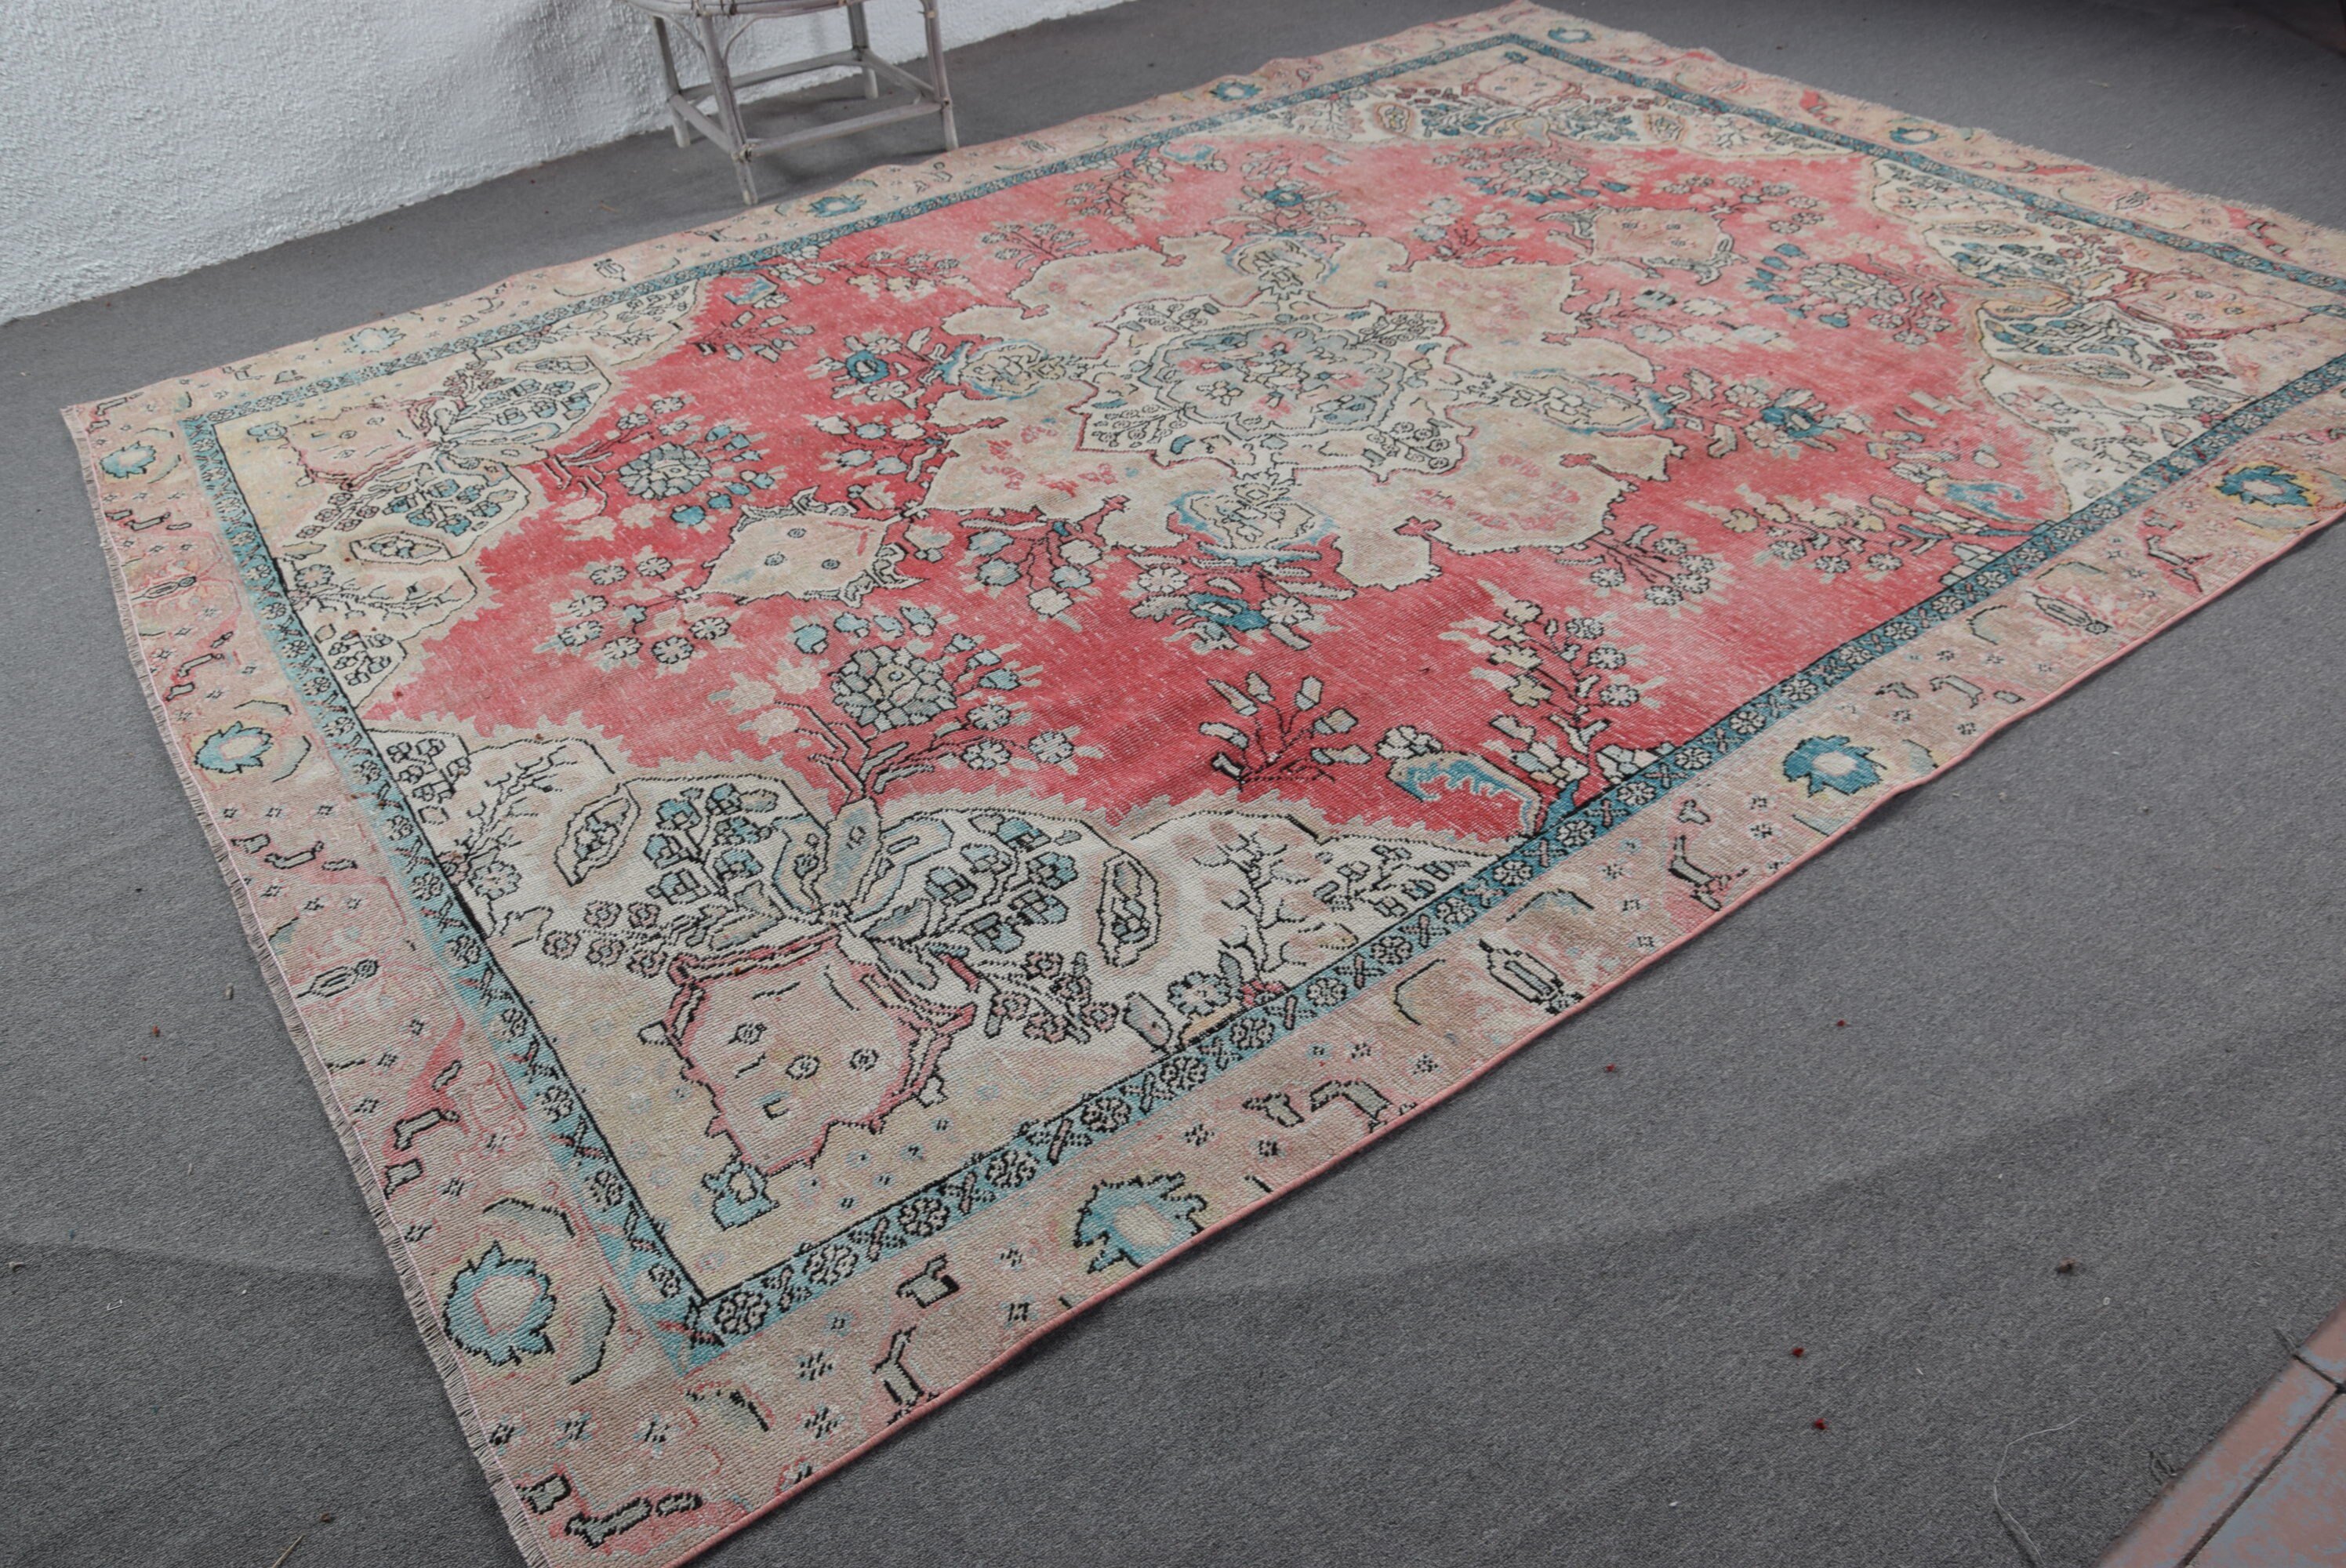 Salon Rugs, Eclectic Rugs, 9x11.9 ft Oversize Rug, Kitchen Rugs, Turkish Rugs, Red Anatolian Rugs, Wool Rug, Living Room Rug, Vintage Rug